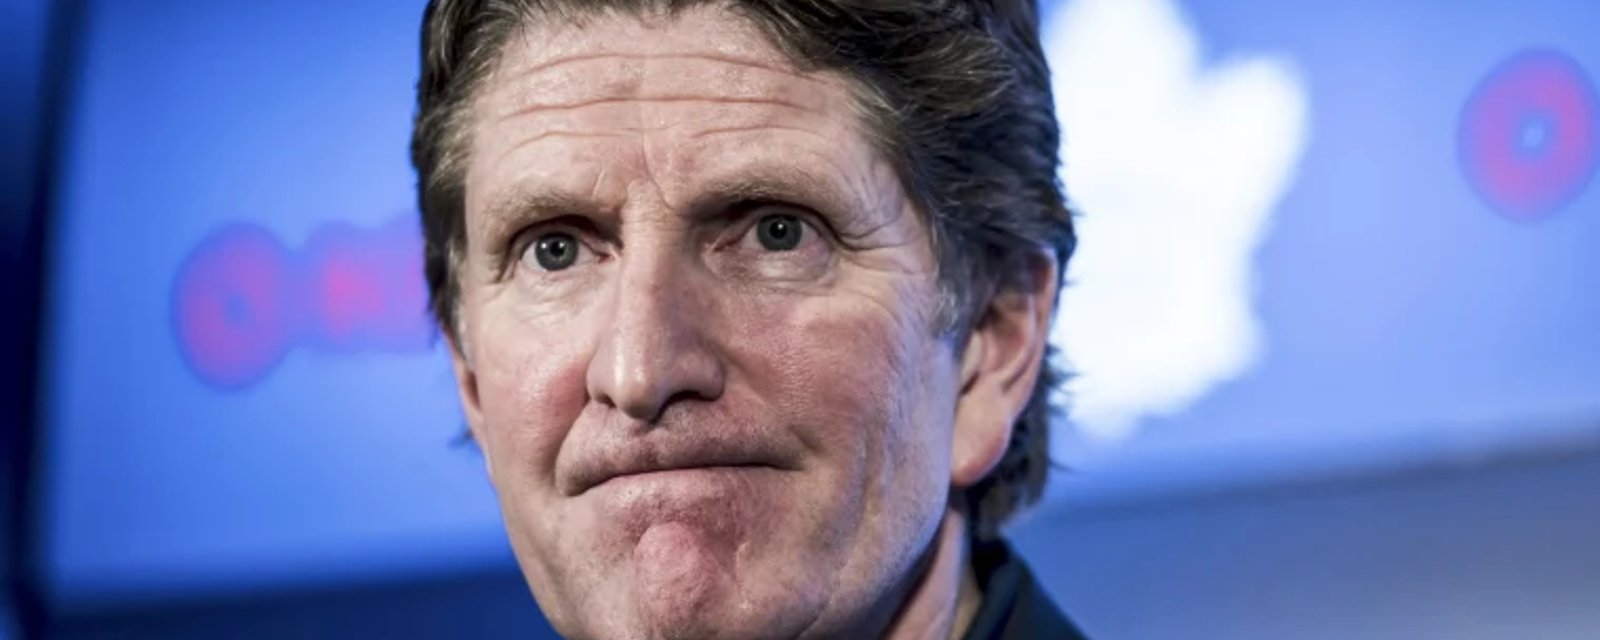 Further stunning details on Mike Babcock revealed by ex-NHL players